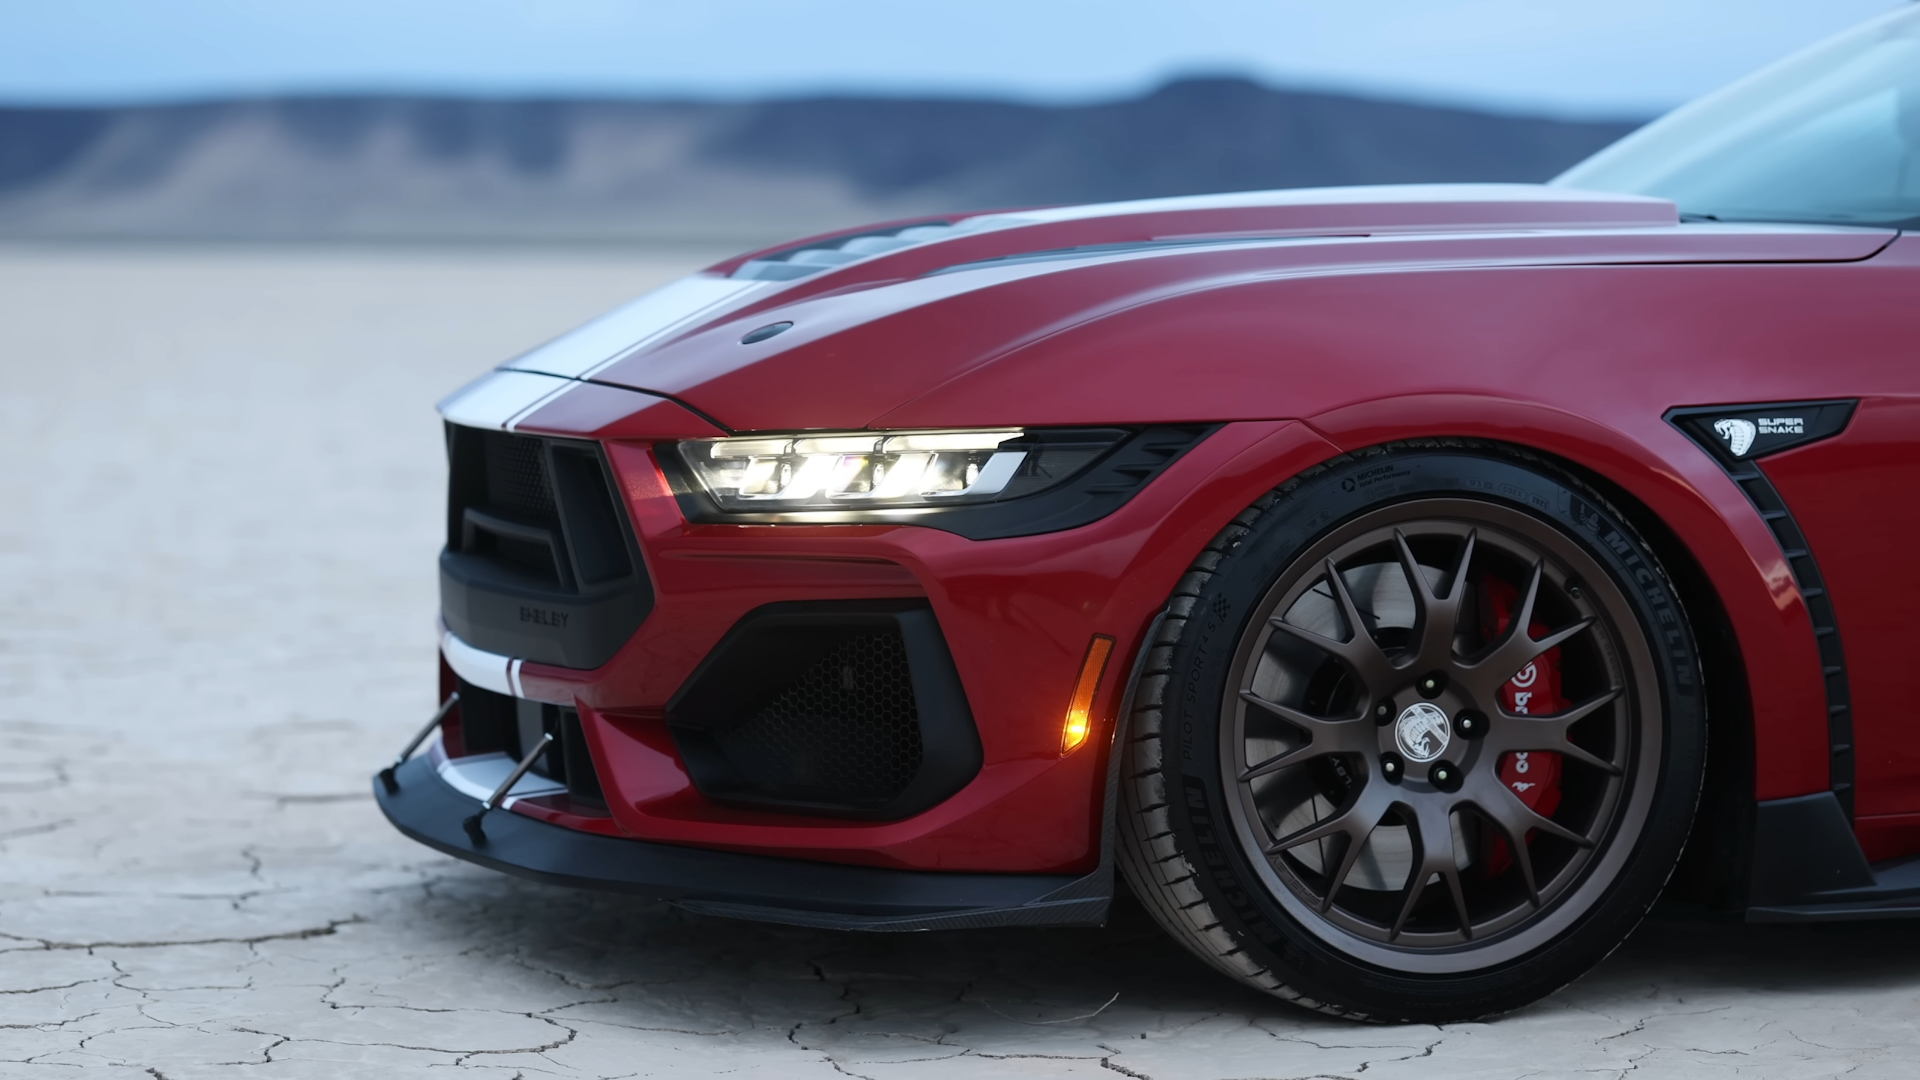 General 1920x1080 Shelby car red striped Ford Mustang muscle cars headlights side view depth of field red cars vehicle closeup